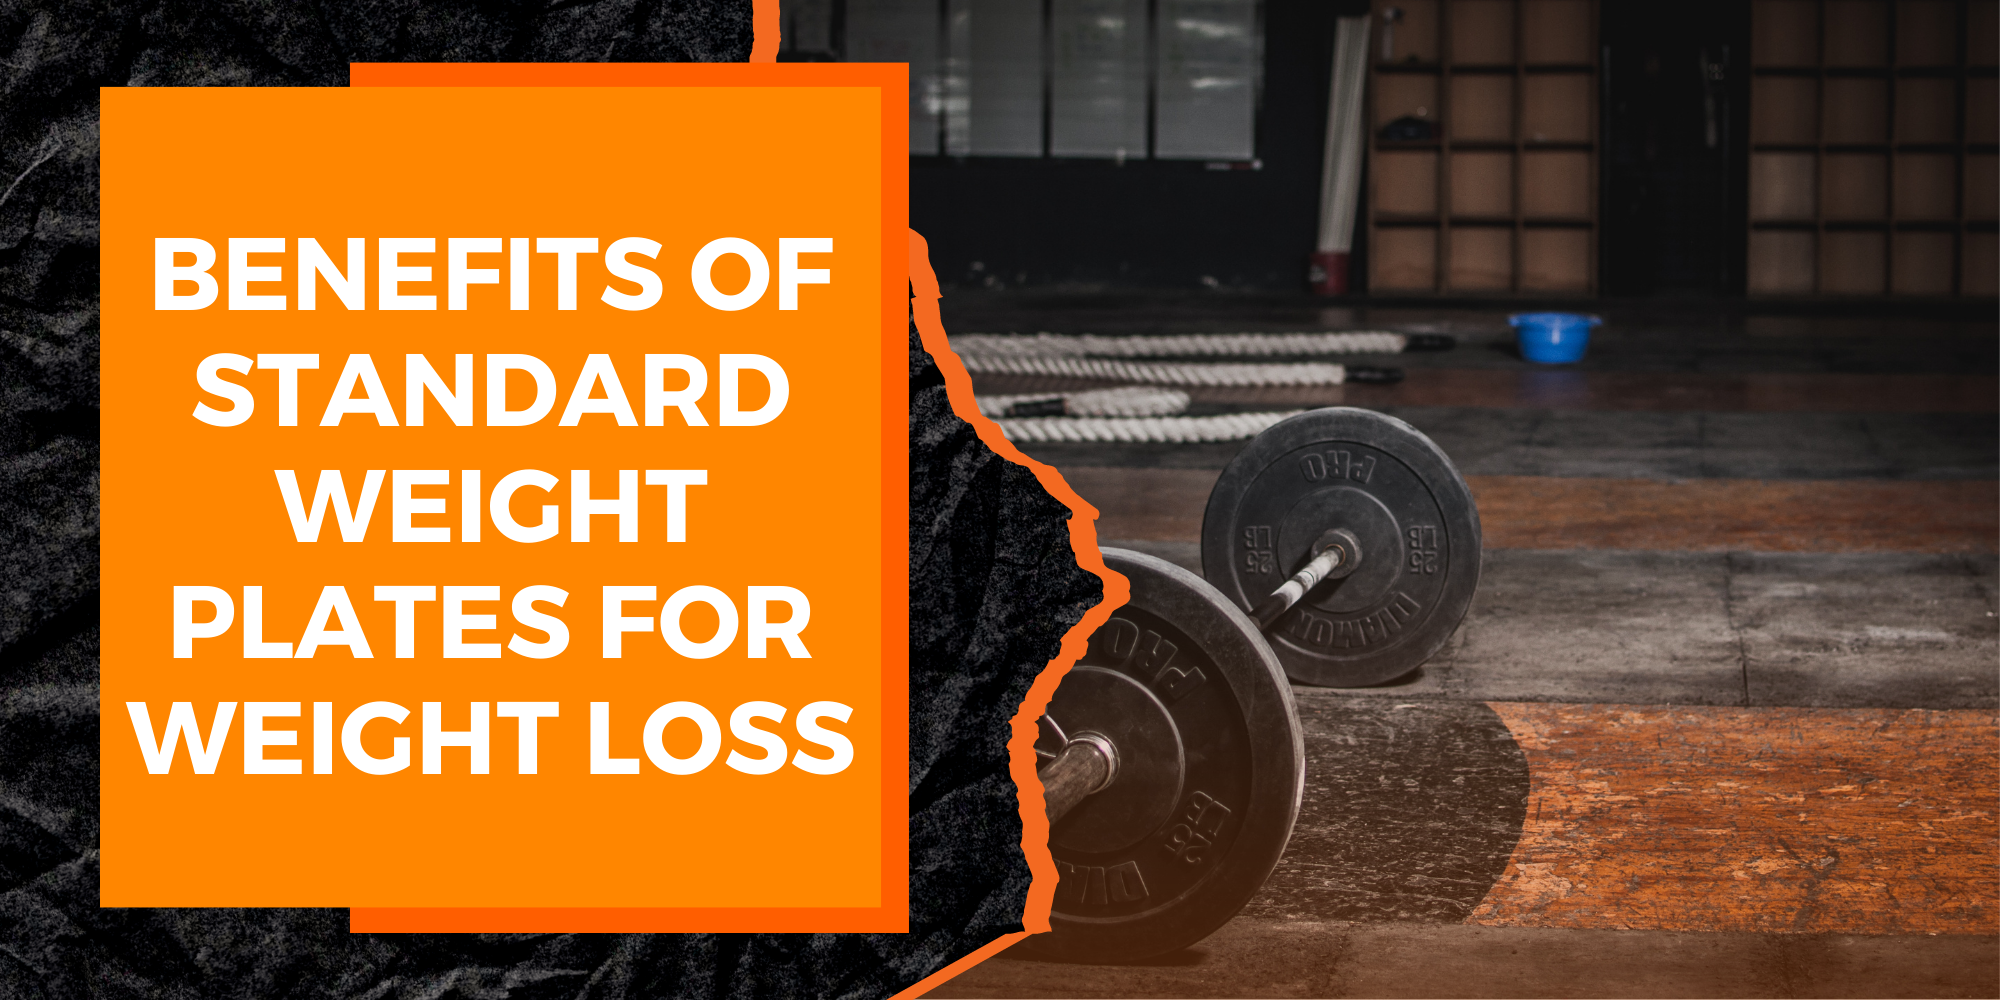 Understanding the Benefits of Standard Weight Plates for Weight Loss